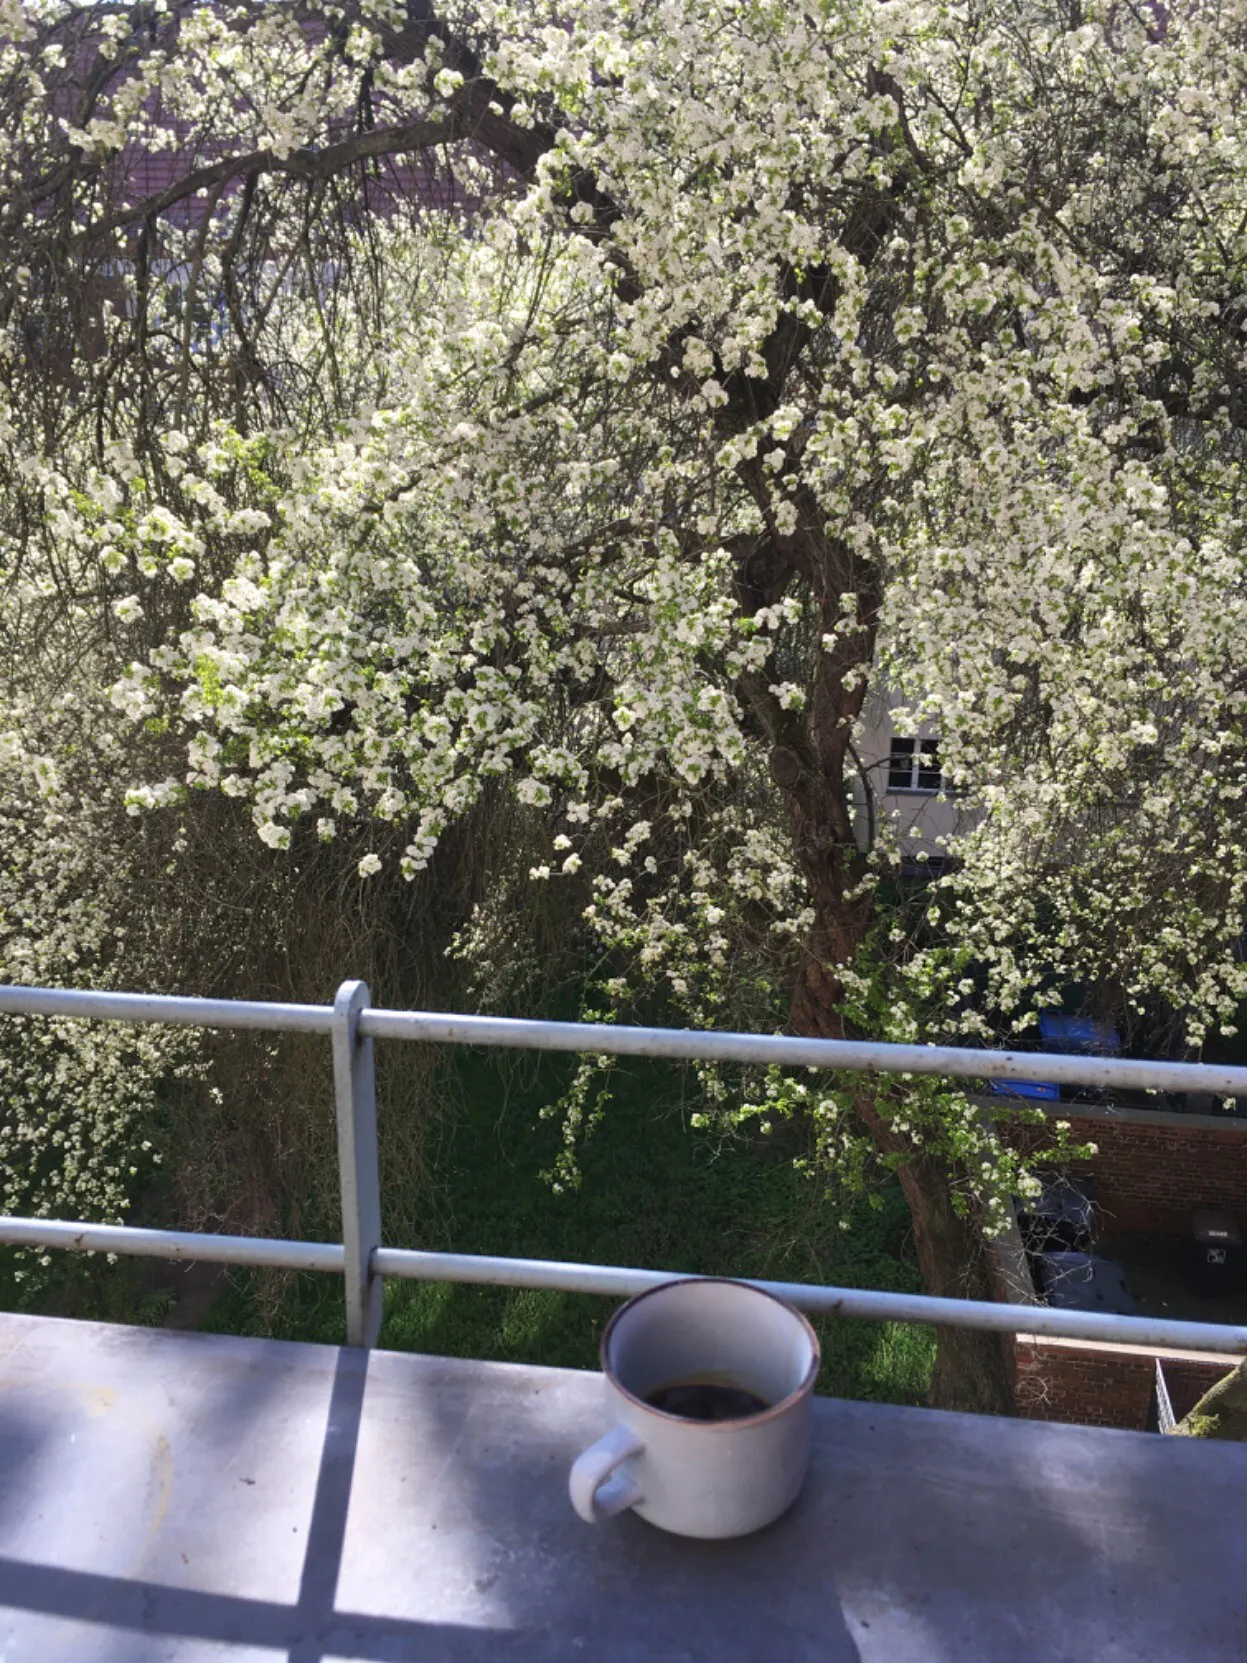 Coffee cup on the edge of a sunny balcony, with a white blooming tree in the background